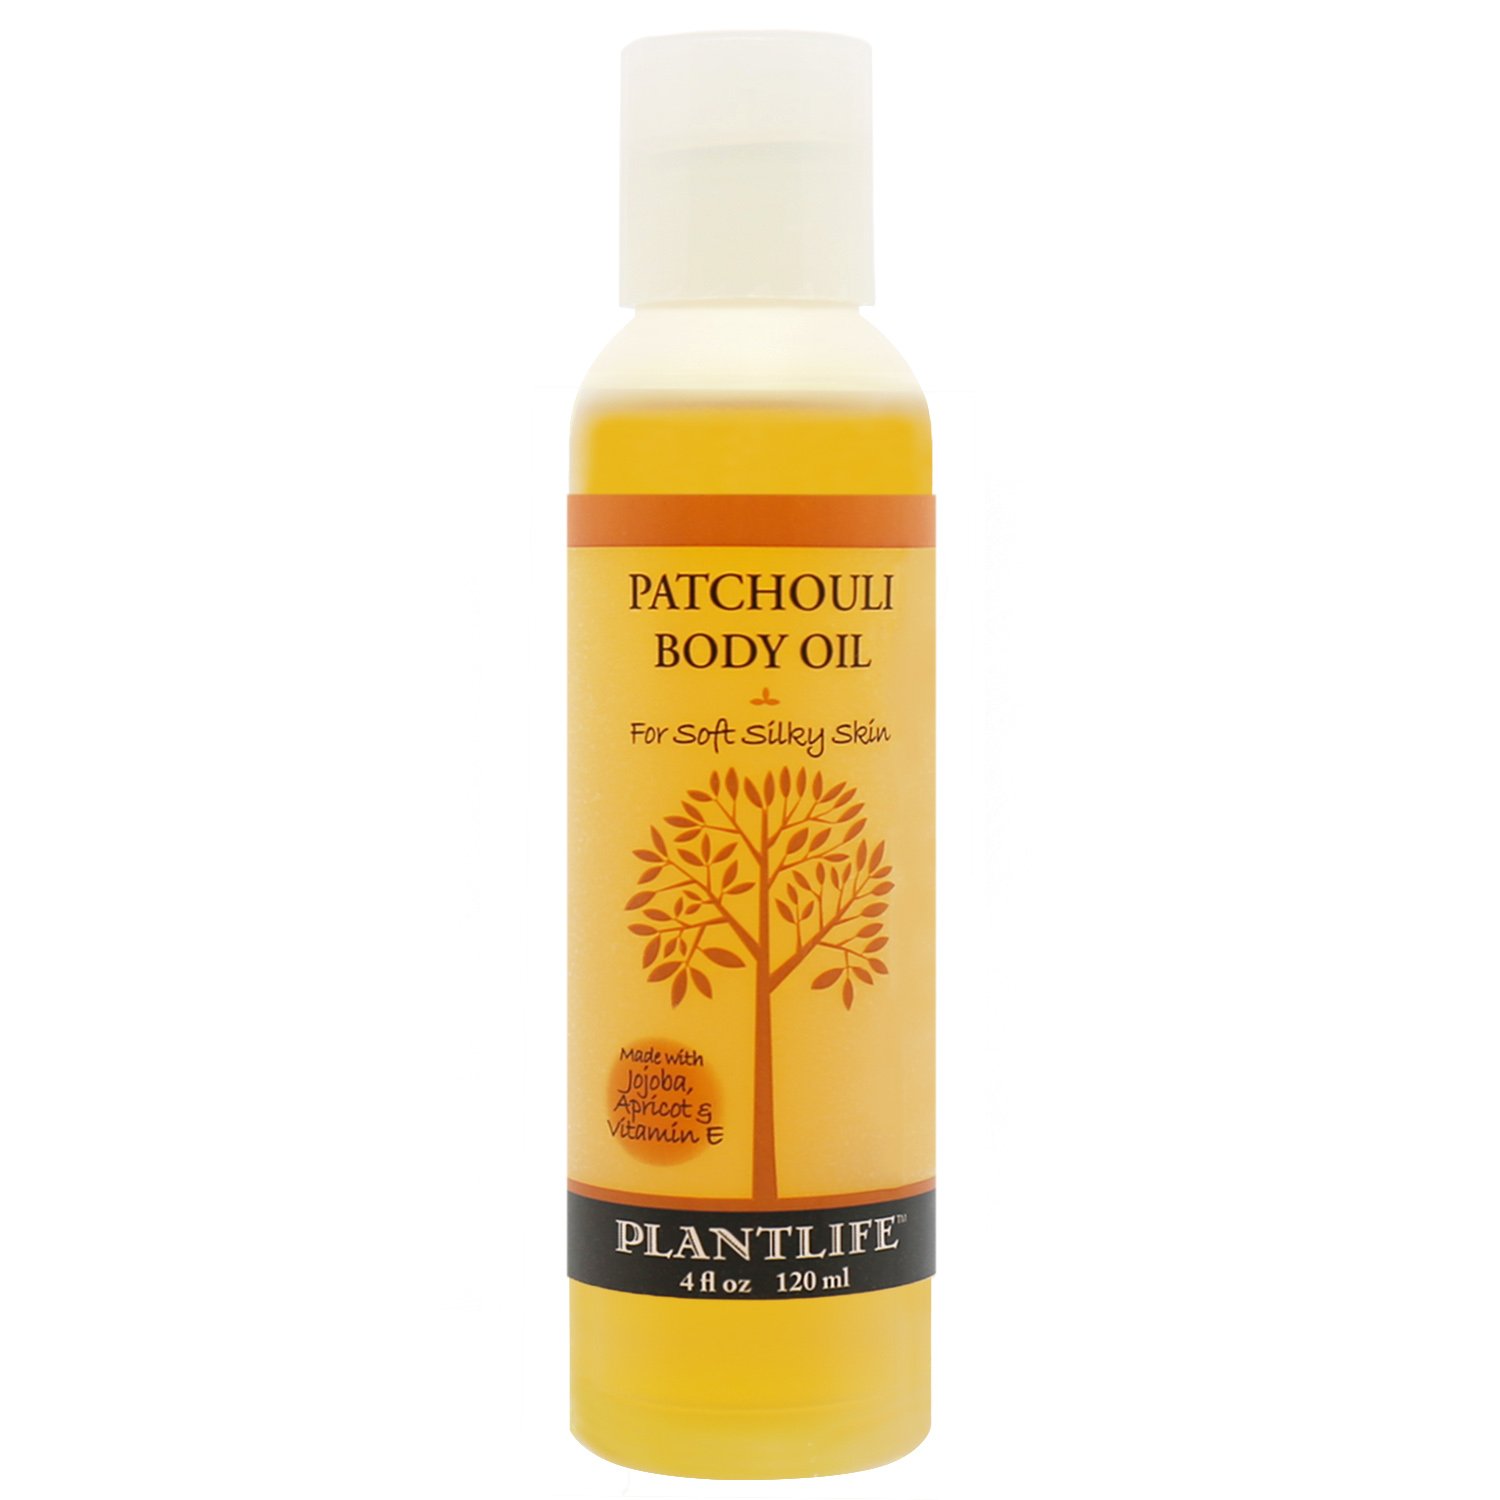 Plantlife Patchouli Body Oil - Formulated for Soft and Silky Skin Using Rich Plant Oils That Absorb and Leave a Light Aroma on the Skin - Made in California 4 oz